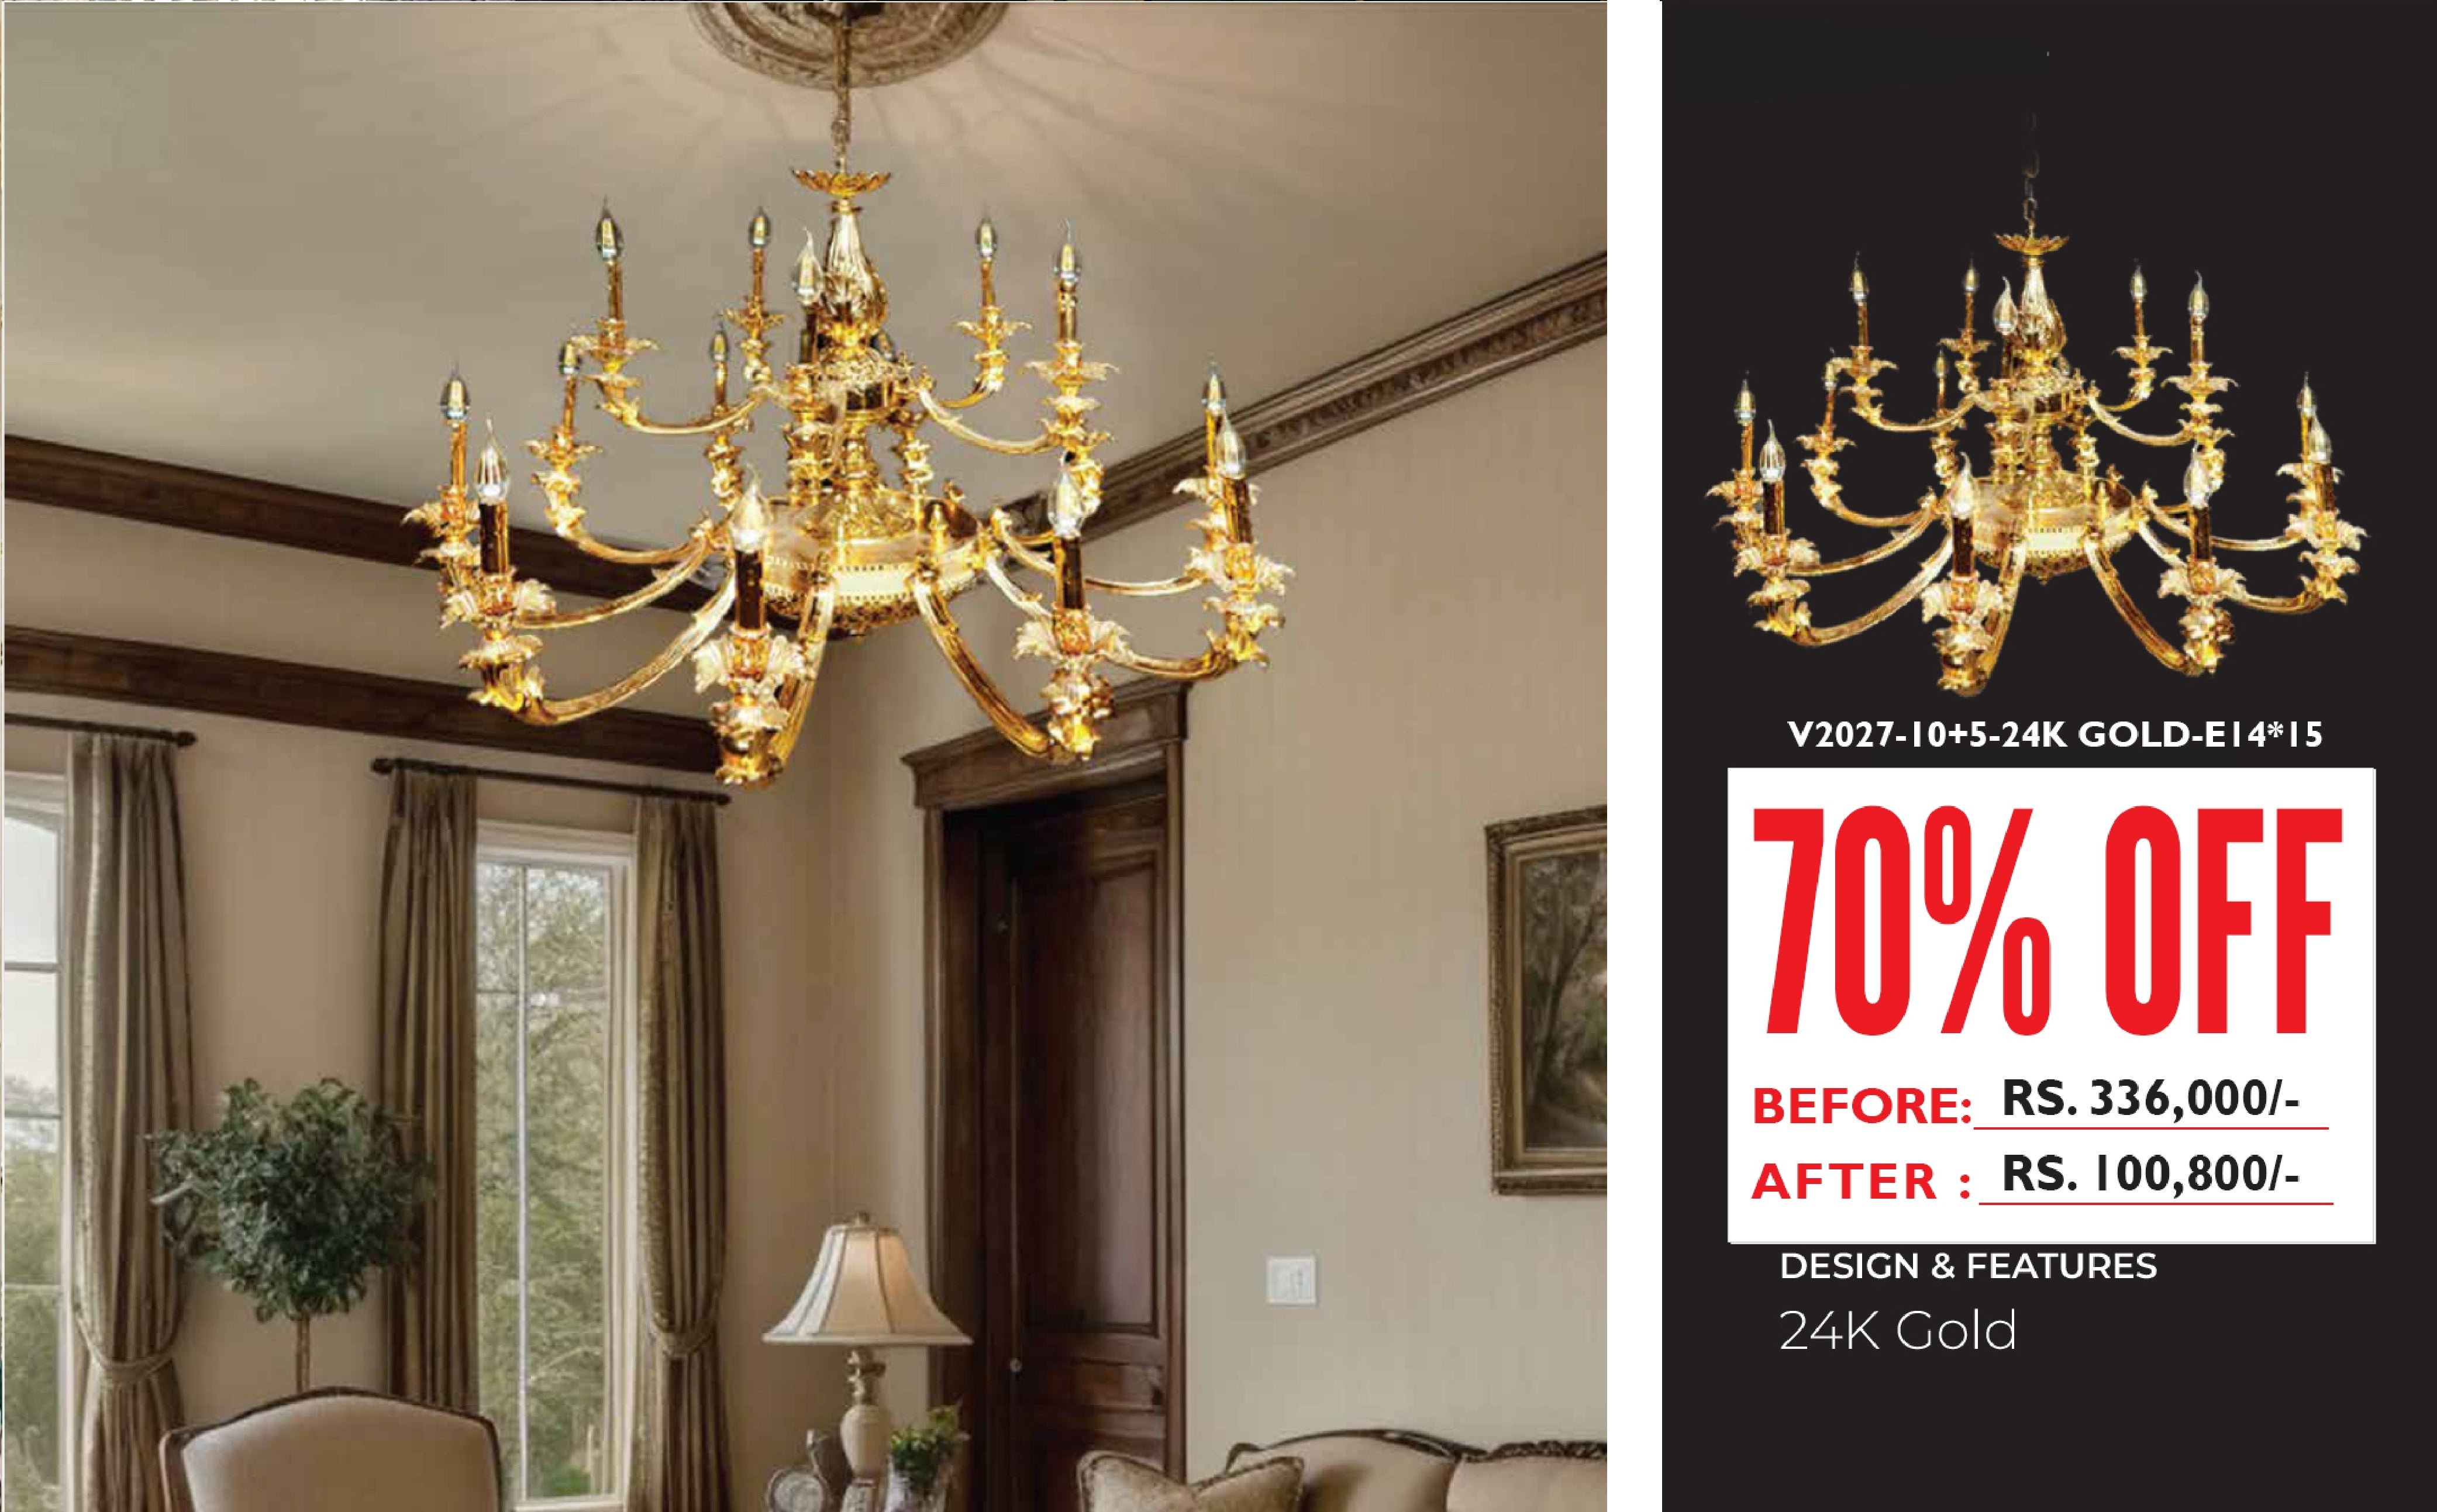 CLASSICAL GOLD CHANDELIER